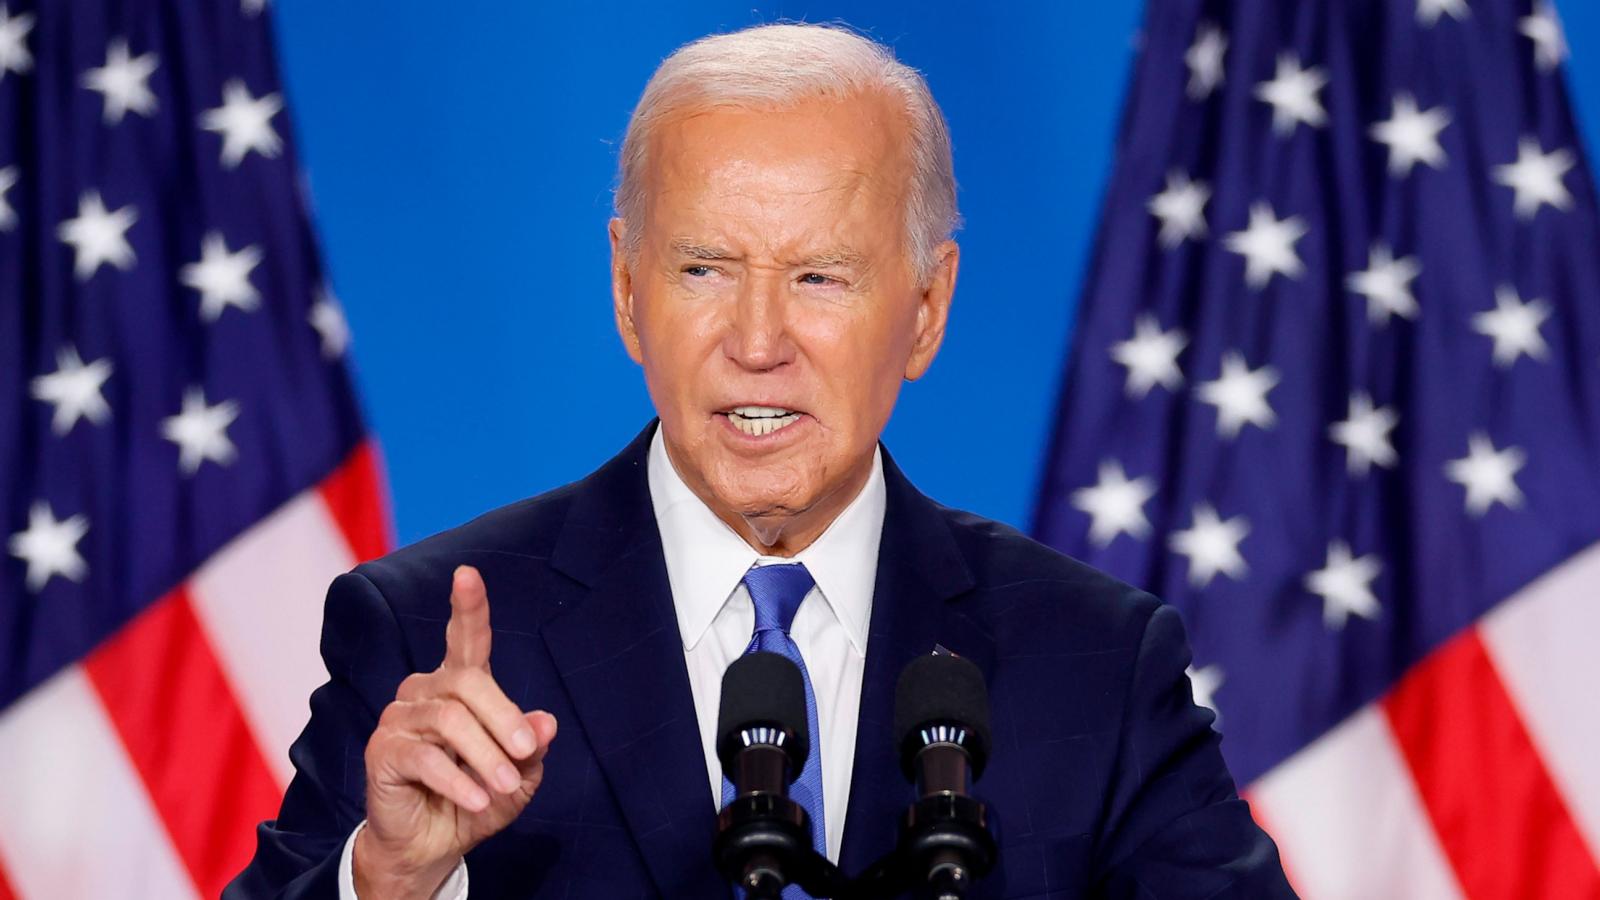 Live updates on the 2024 election: Biden says at campaign rally in Michigan: “I’m running”